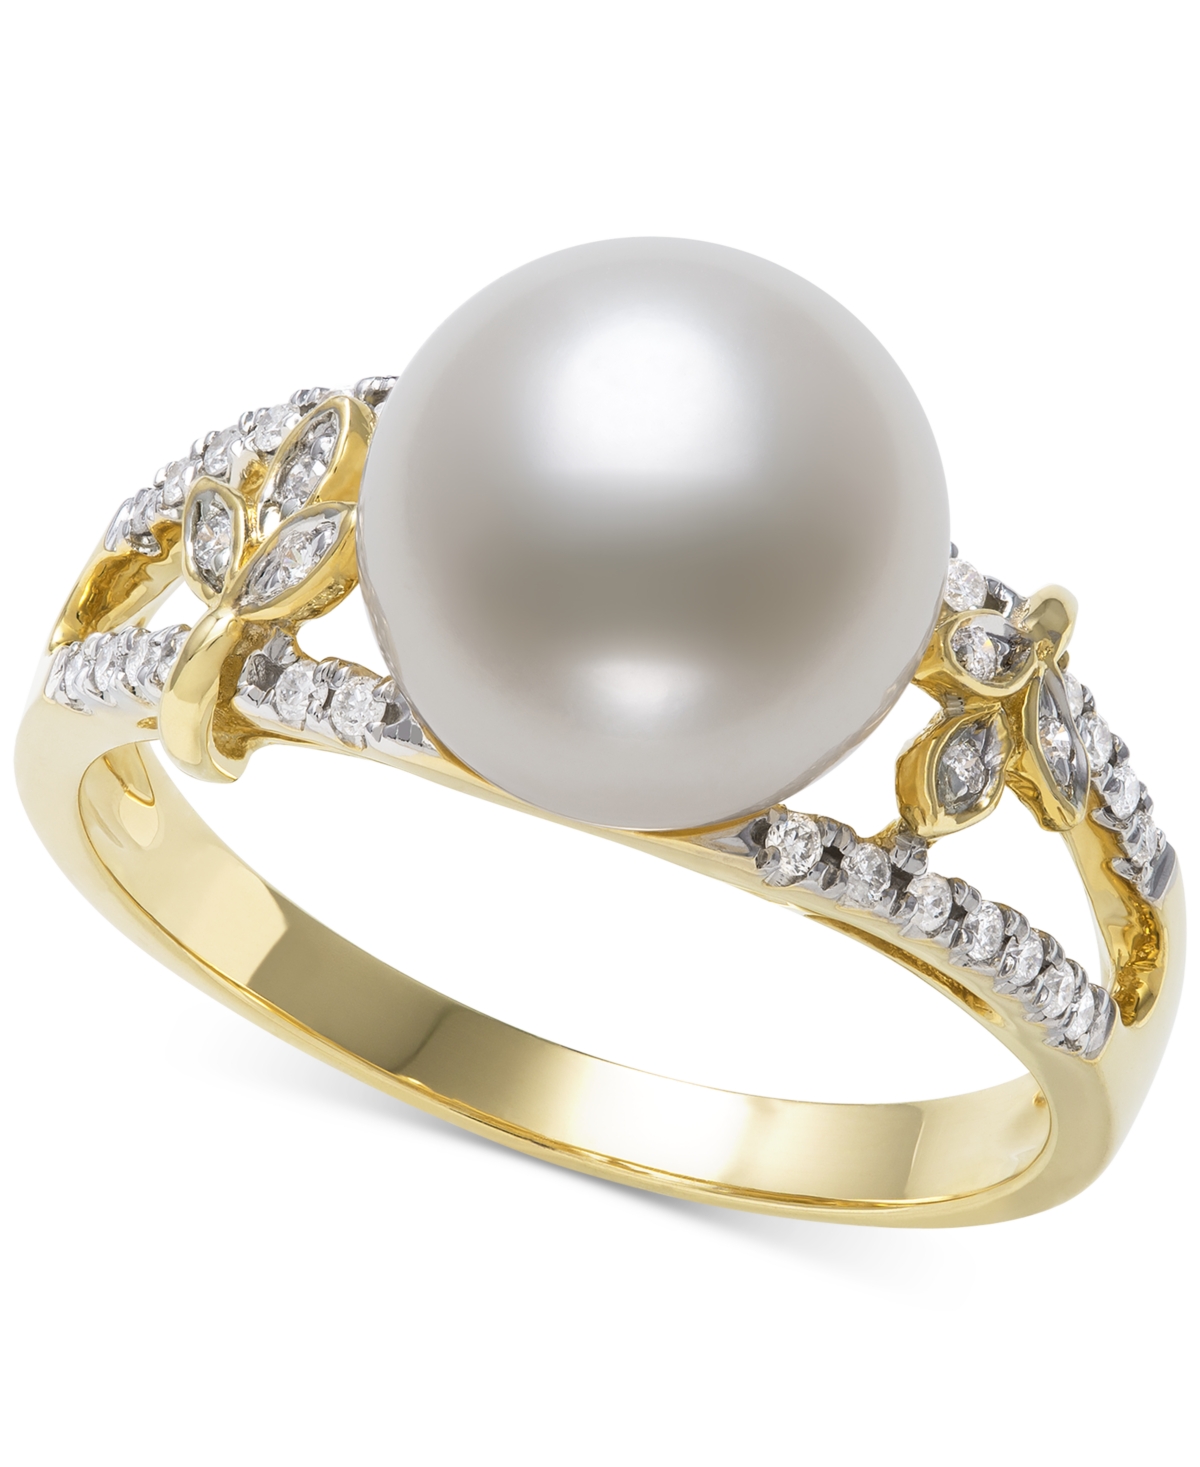 Belle de Mer Cultured Freshwater Pearl (9mm) & Diamond (1/6 ct. t.w.) Openwork Ring in 14k Gold, Created for Macy's